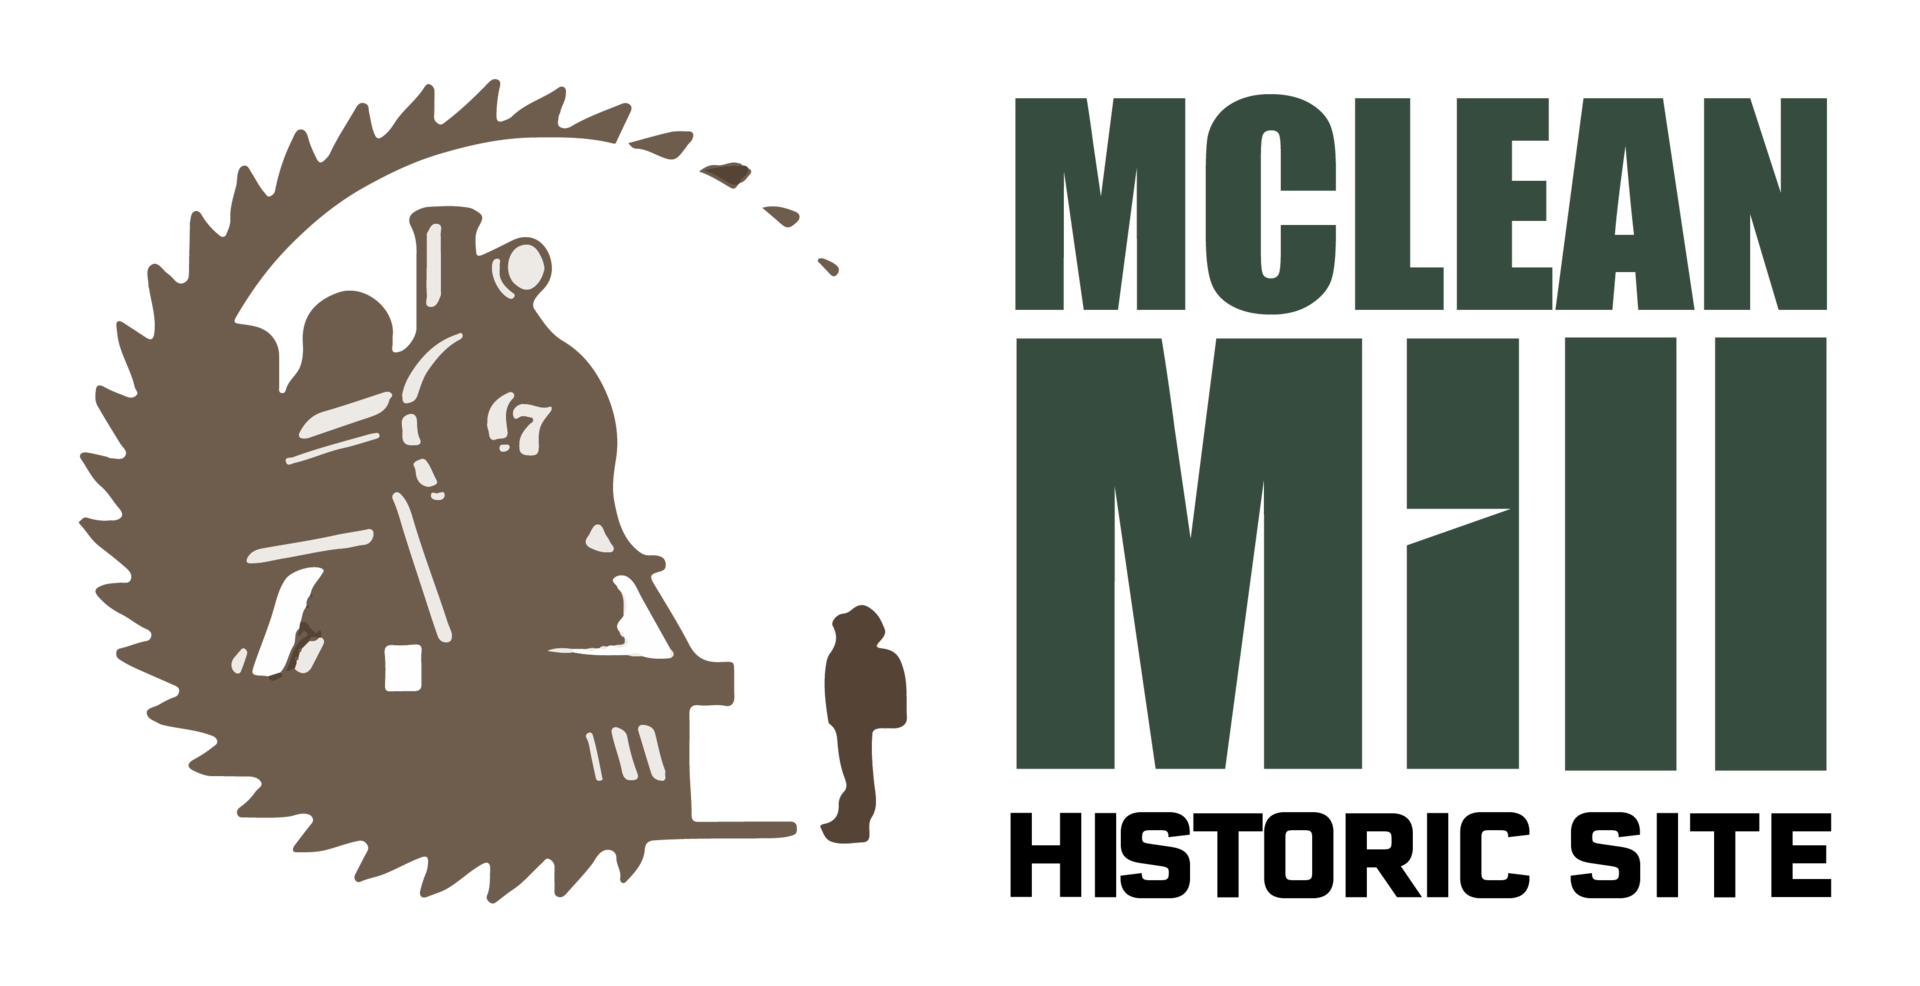 Camping is back at McLean Mill National Historic Site!